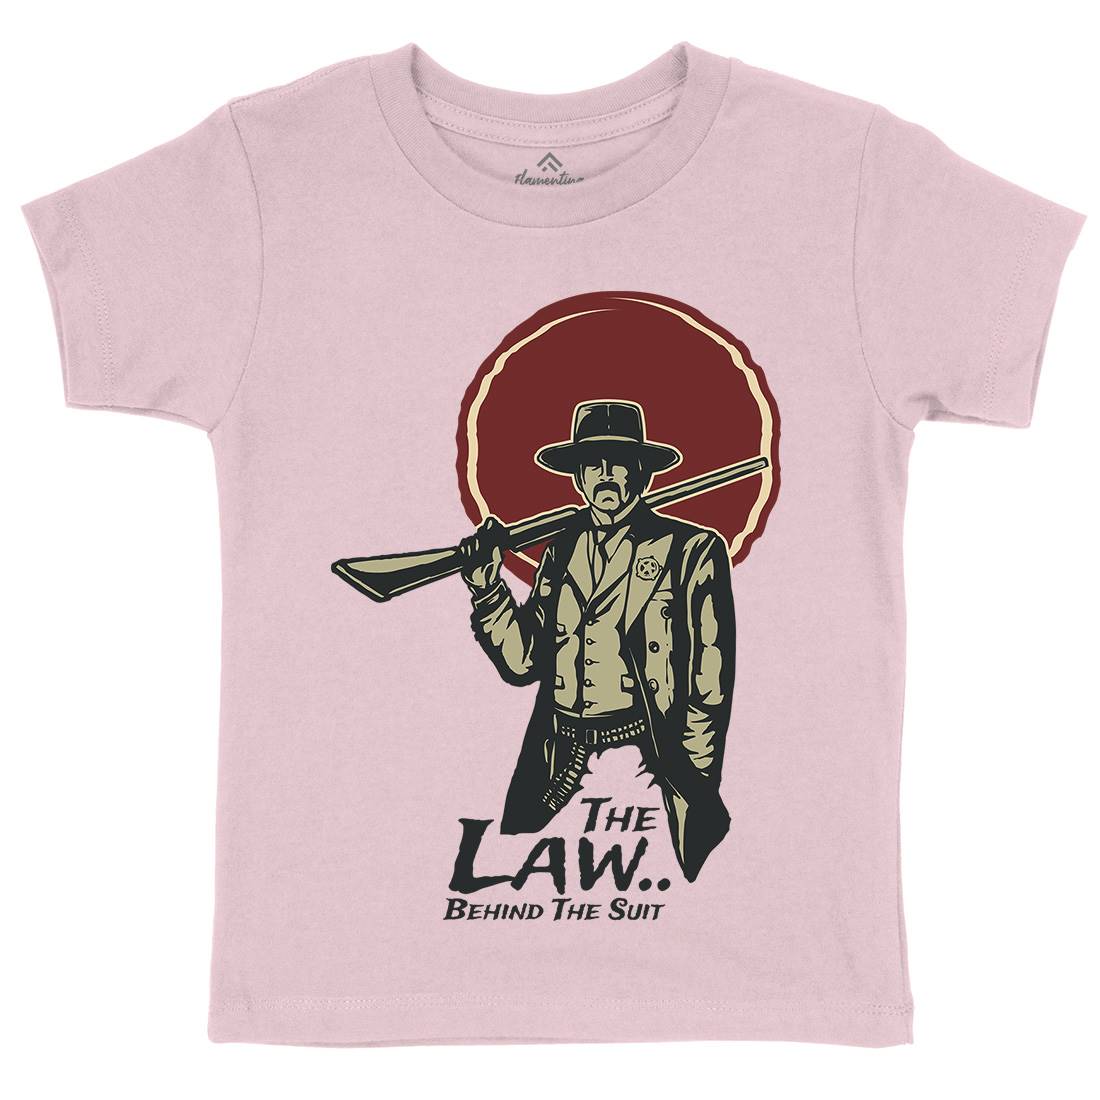 Law Behind Kids Crew Neck T-Shirt American A382